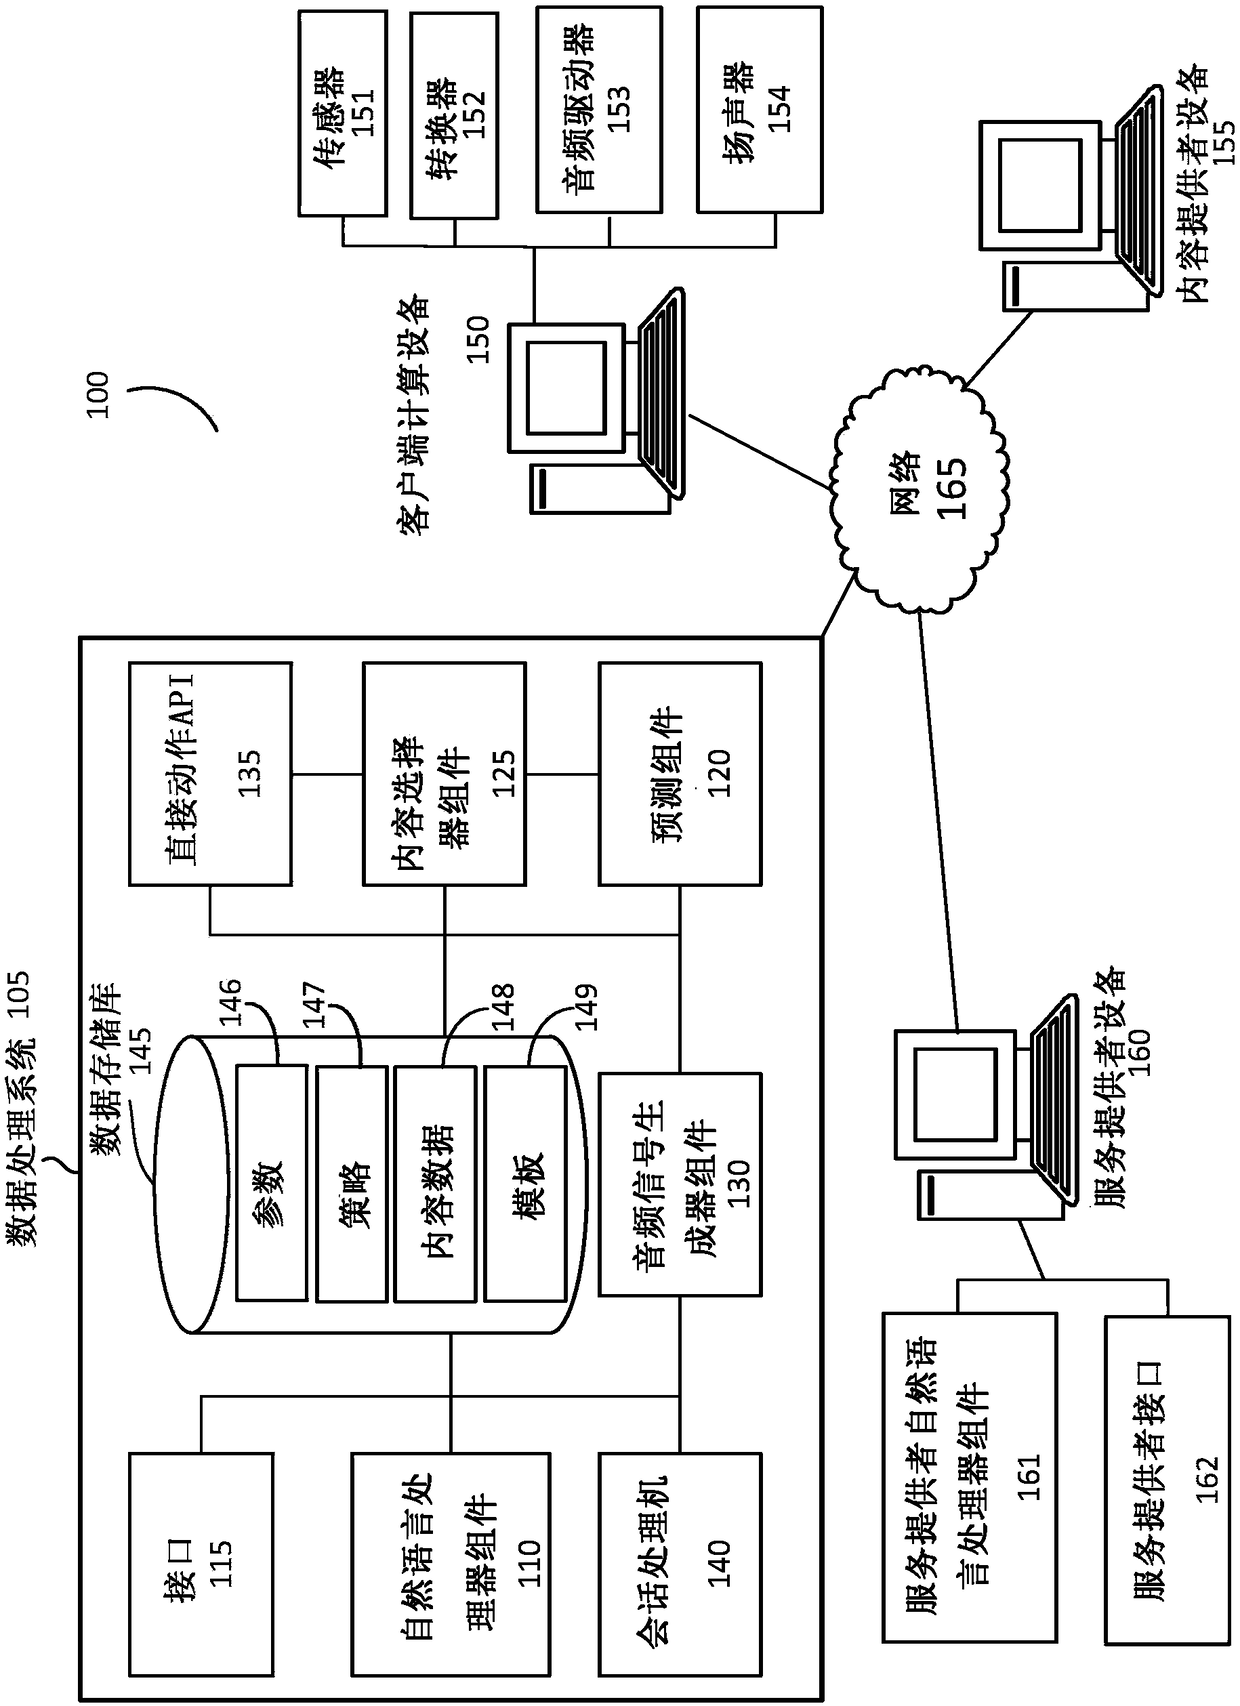 Sequence dependent operation processing of packet based data message transmissions